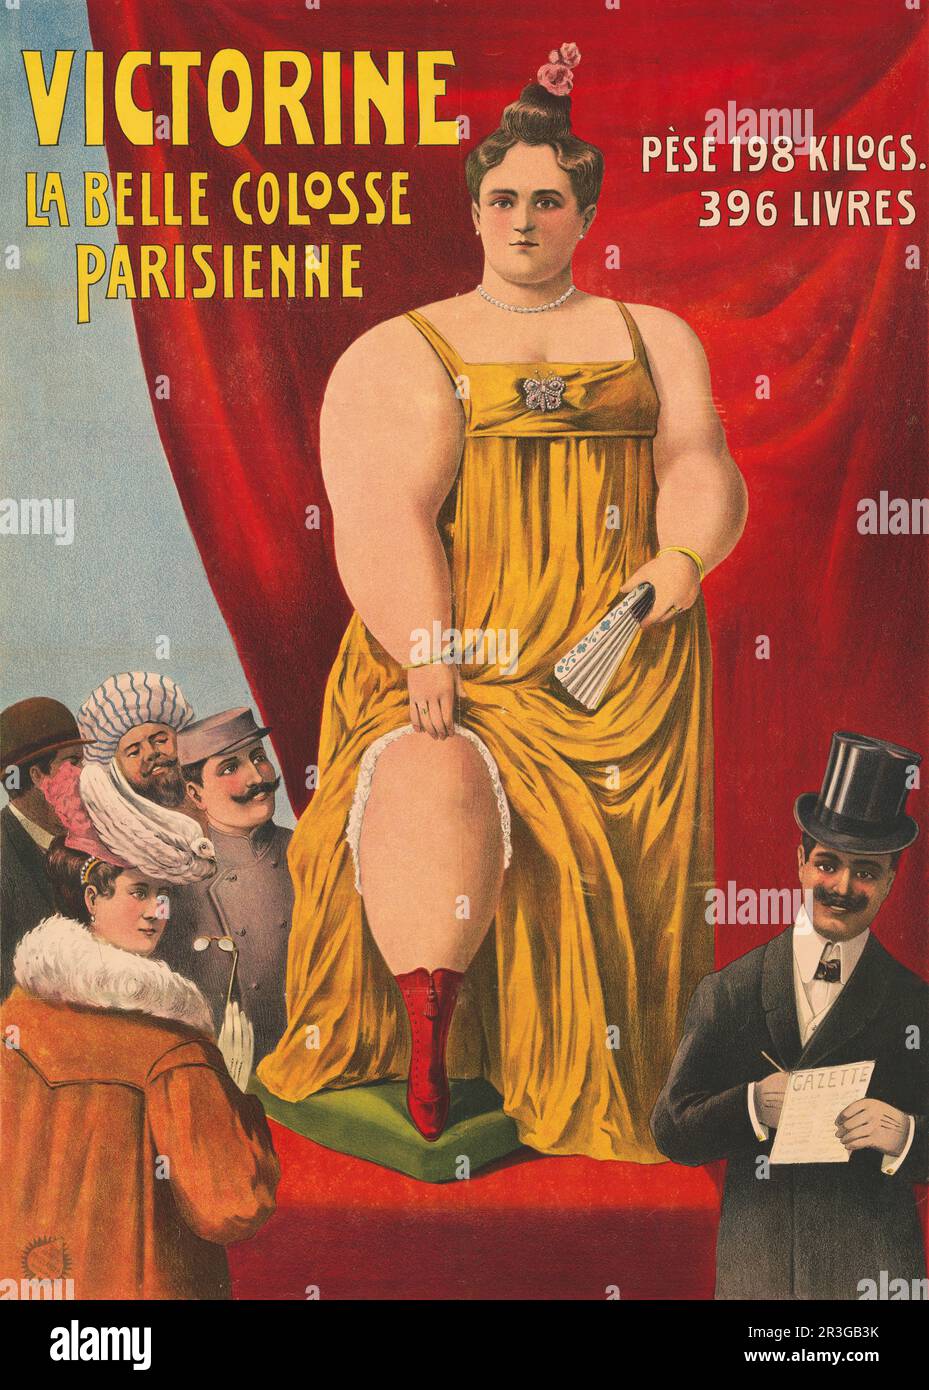 Vintage French poster showing Victorine, the beautiful Parisian large woman, exposing her knee. Stock Photo